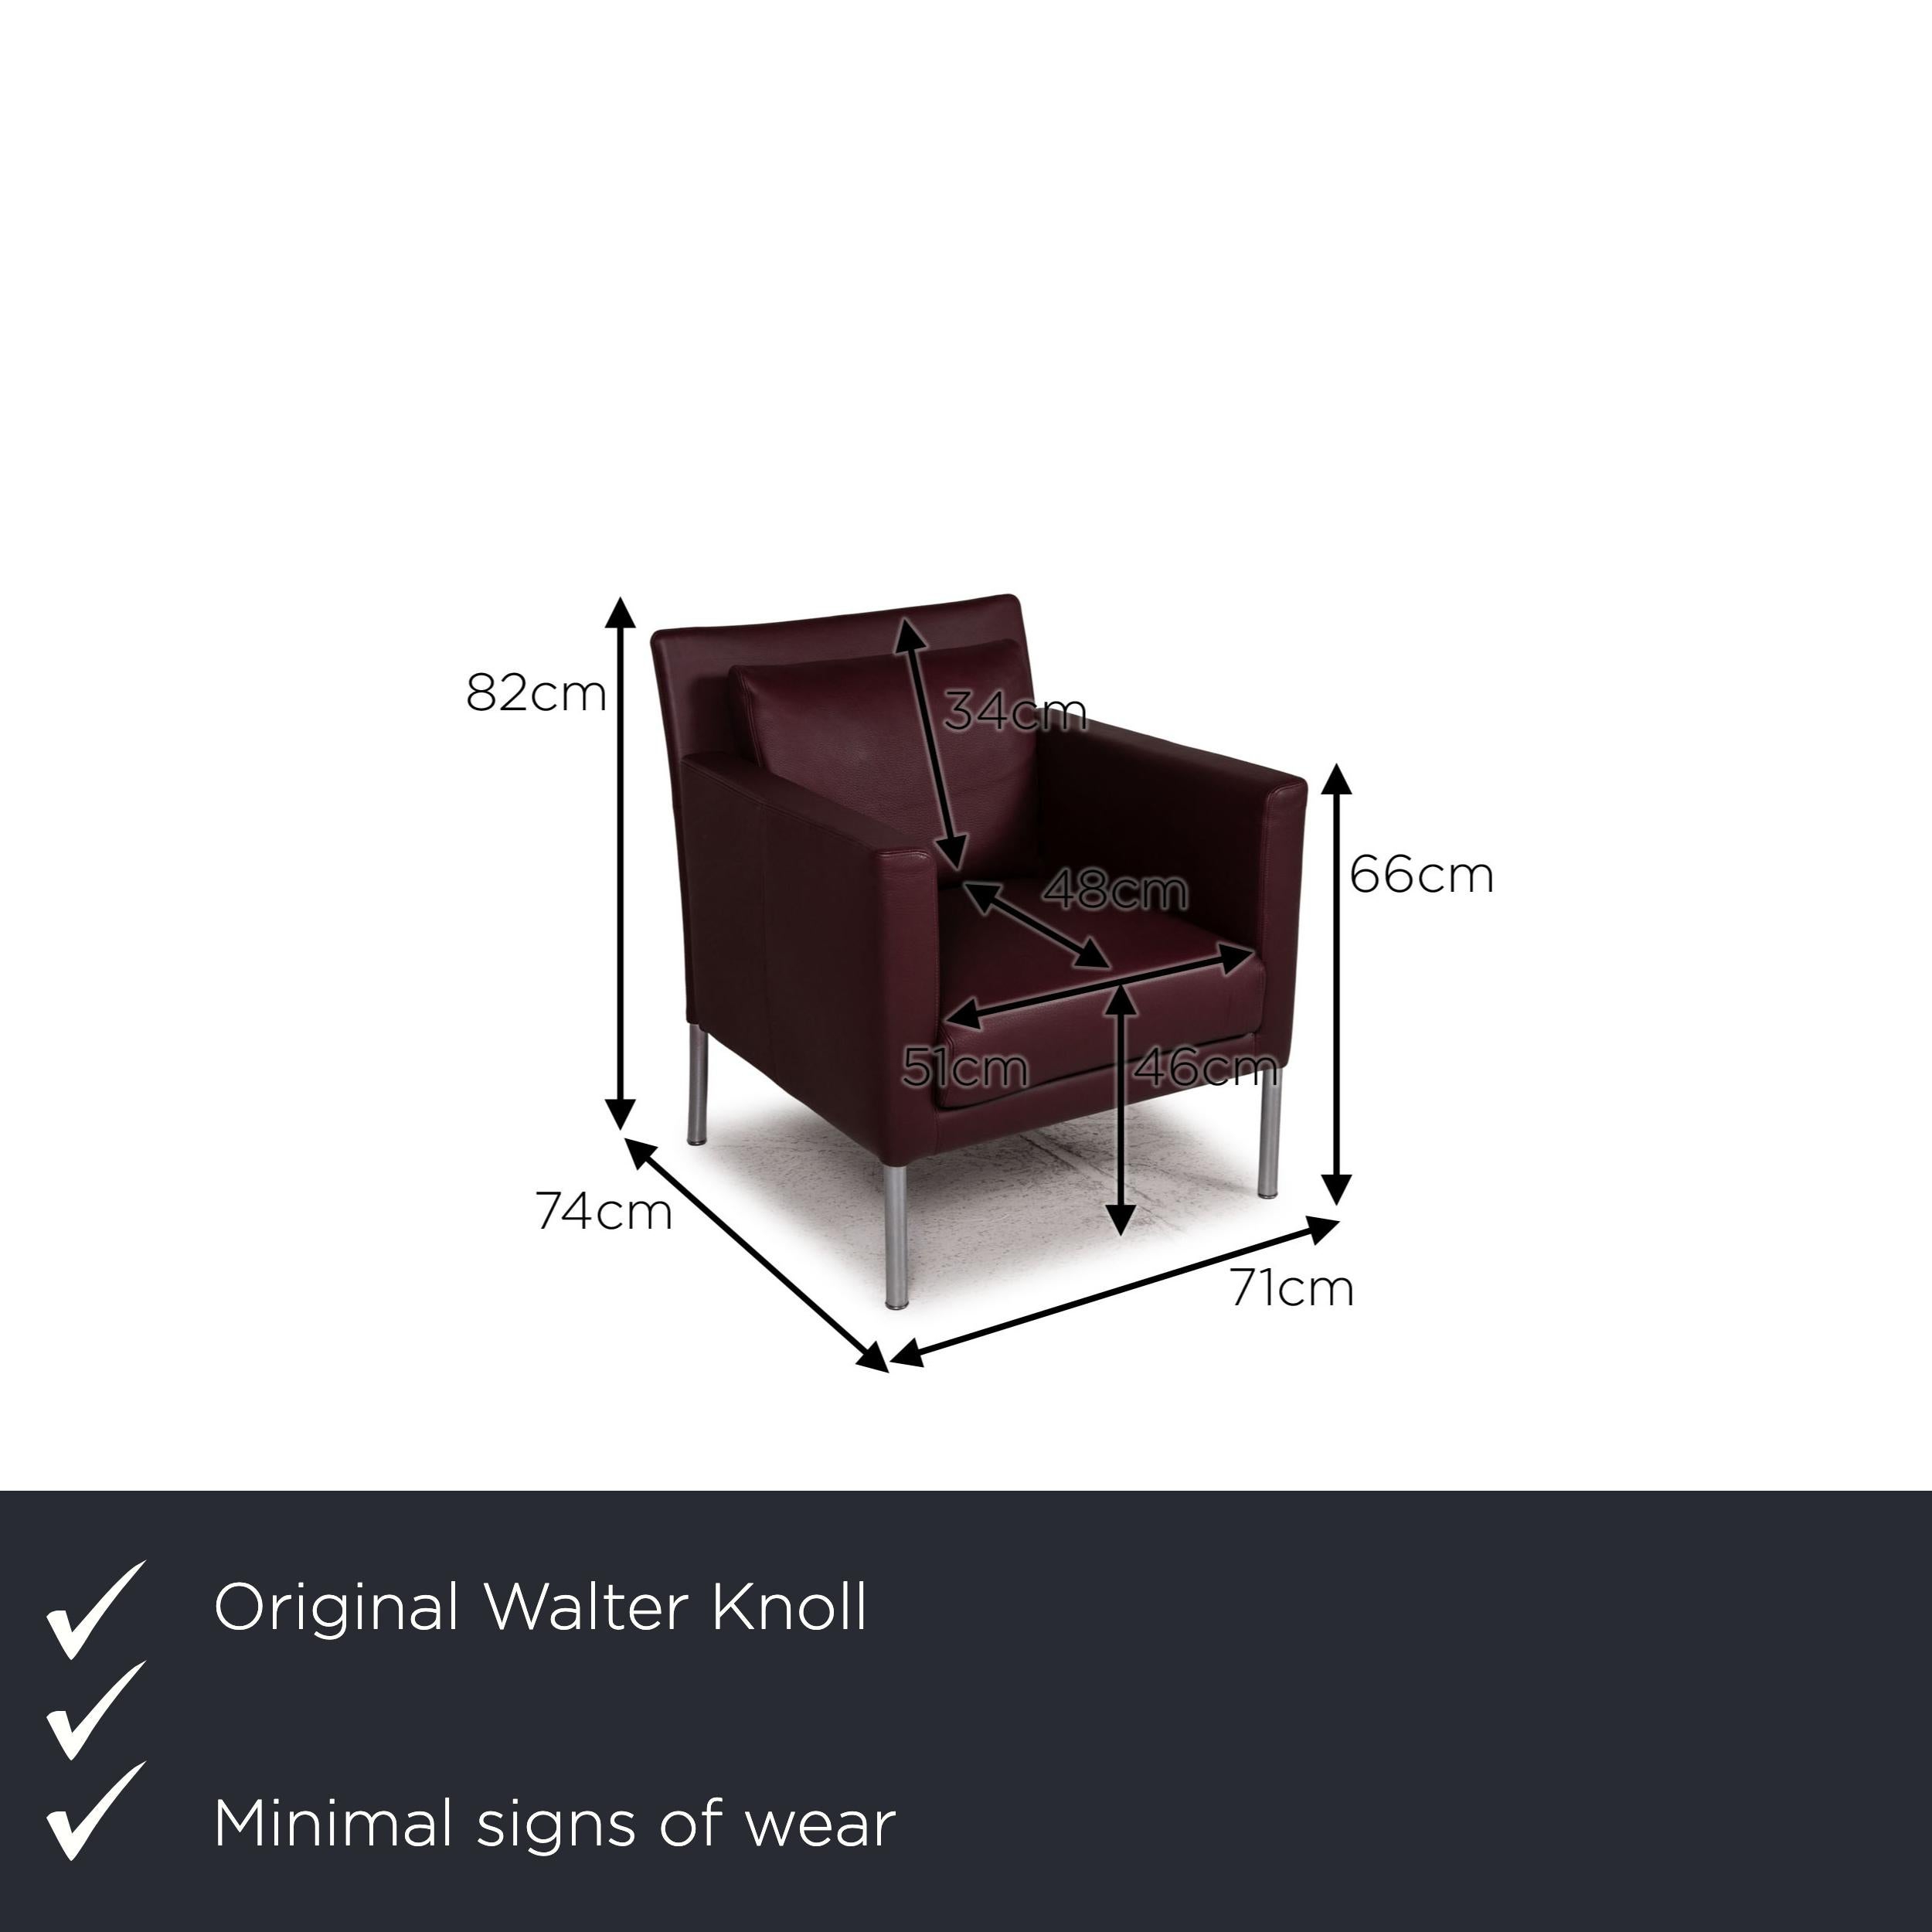 We present to you a Walter Knoll Jason leather armchair dark red.

Product measurements in centimeters:

Depth: 74
Width: 71
Height: 82
Seat height: 46
Rest height: 66
Seat depth: 48
Seat width: 51
Back height: 34.

    